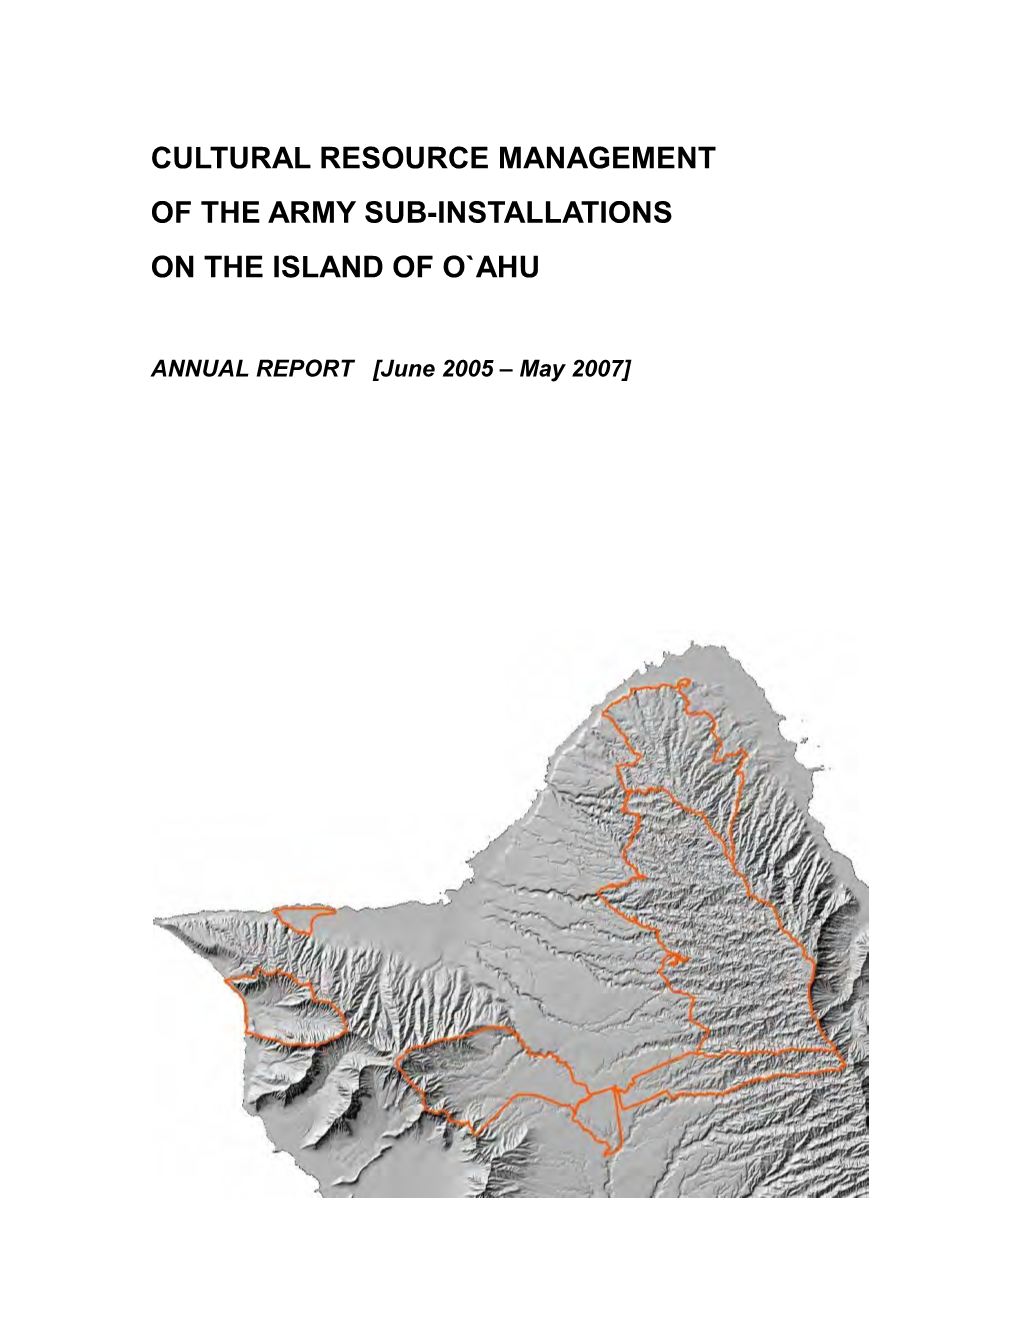 Cultural Resource Management of the Army Sub-Installations on the Island of O`Ahu. Annual Report (June 2005-May 2007)